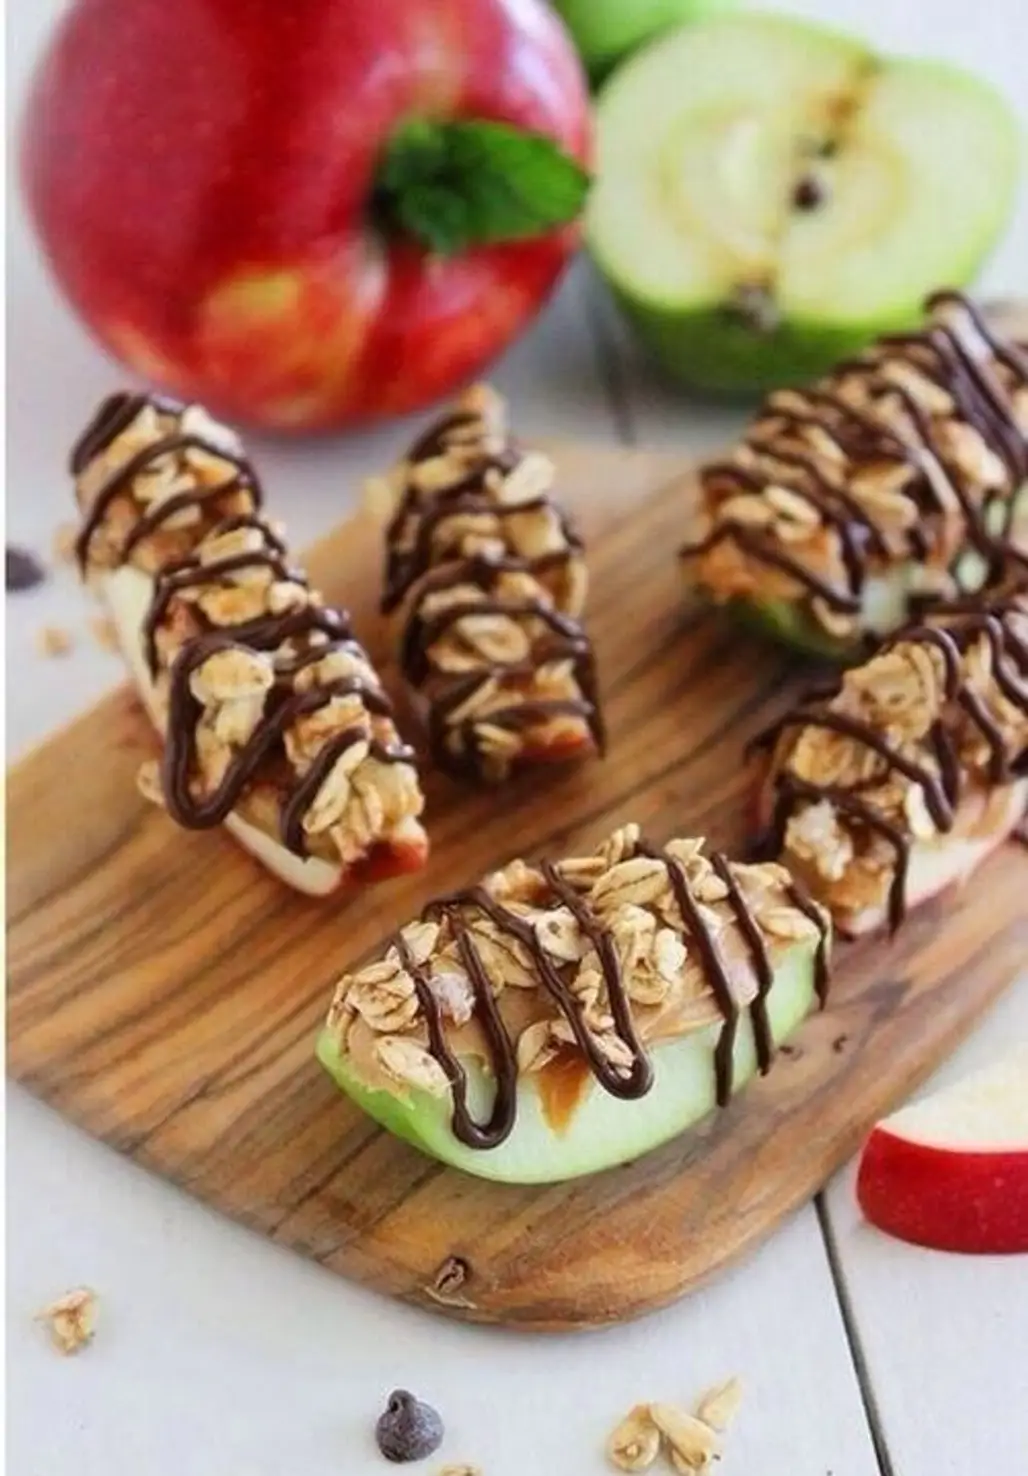 Apples and Peanut Butter with a Twist